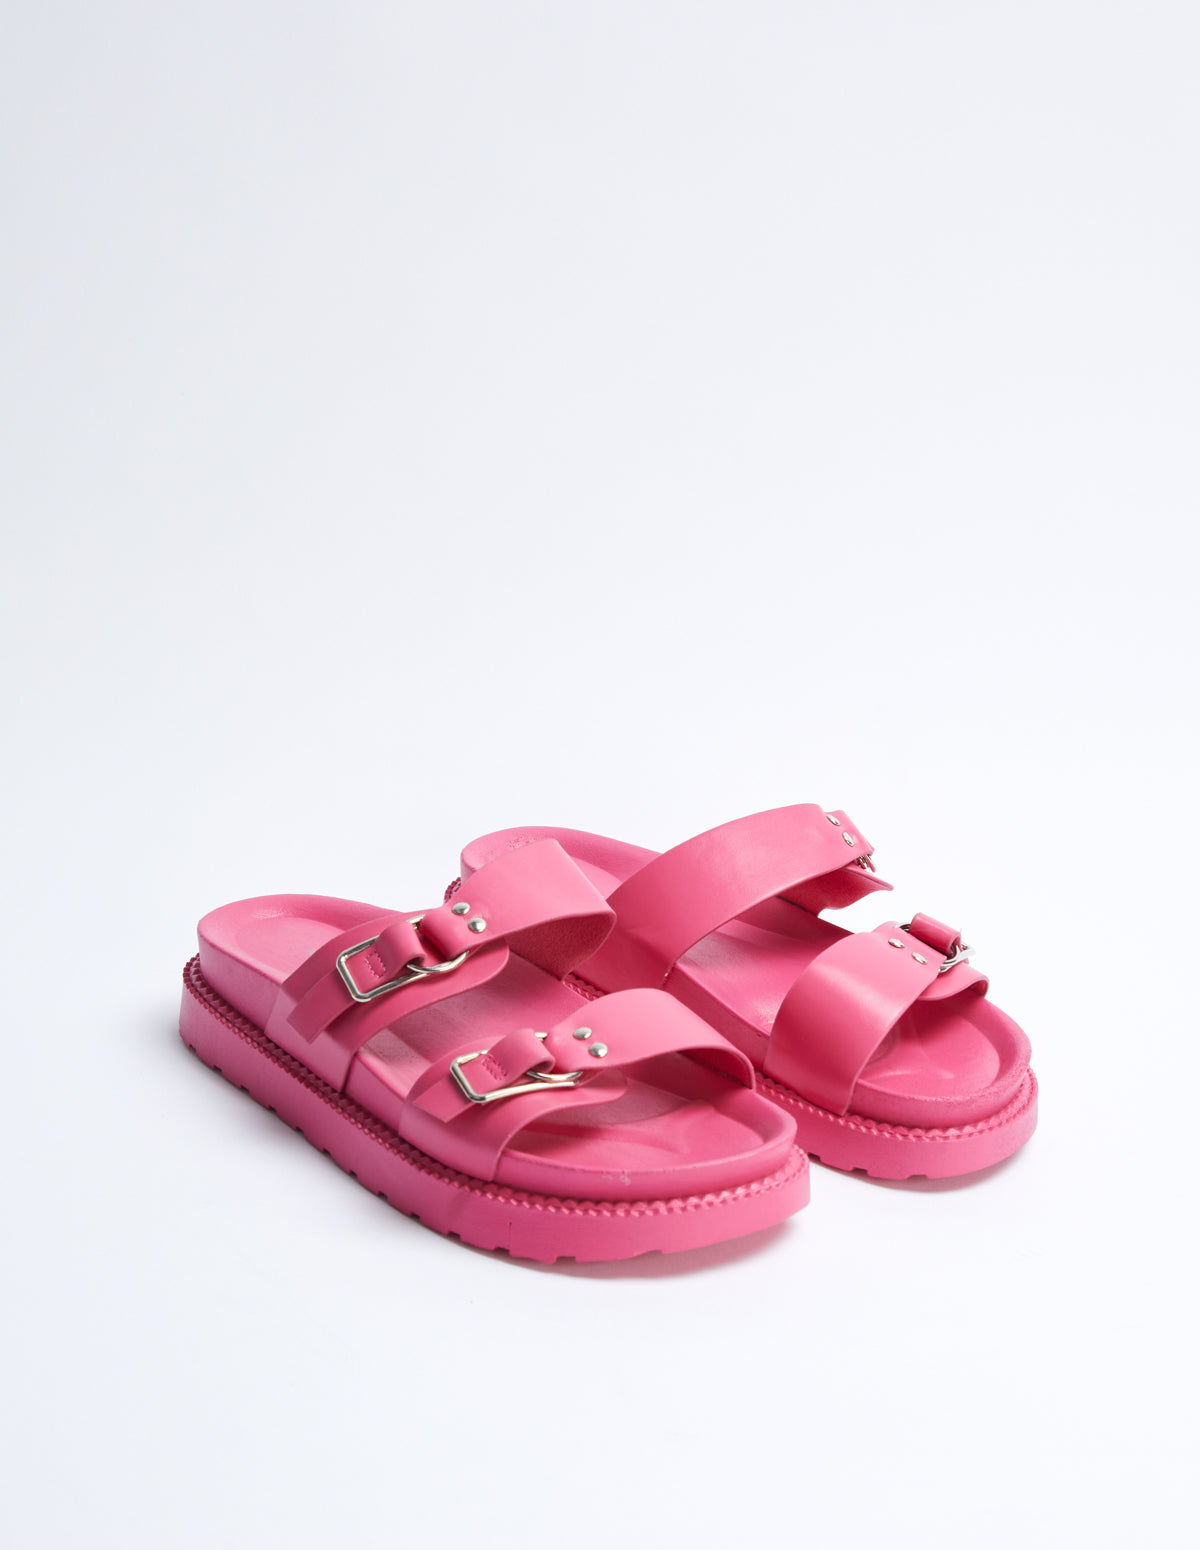 Two Strap Buckle Sandals - UK 5 (EU 38) / PINK